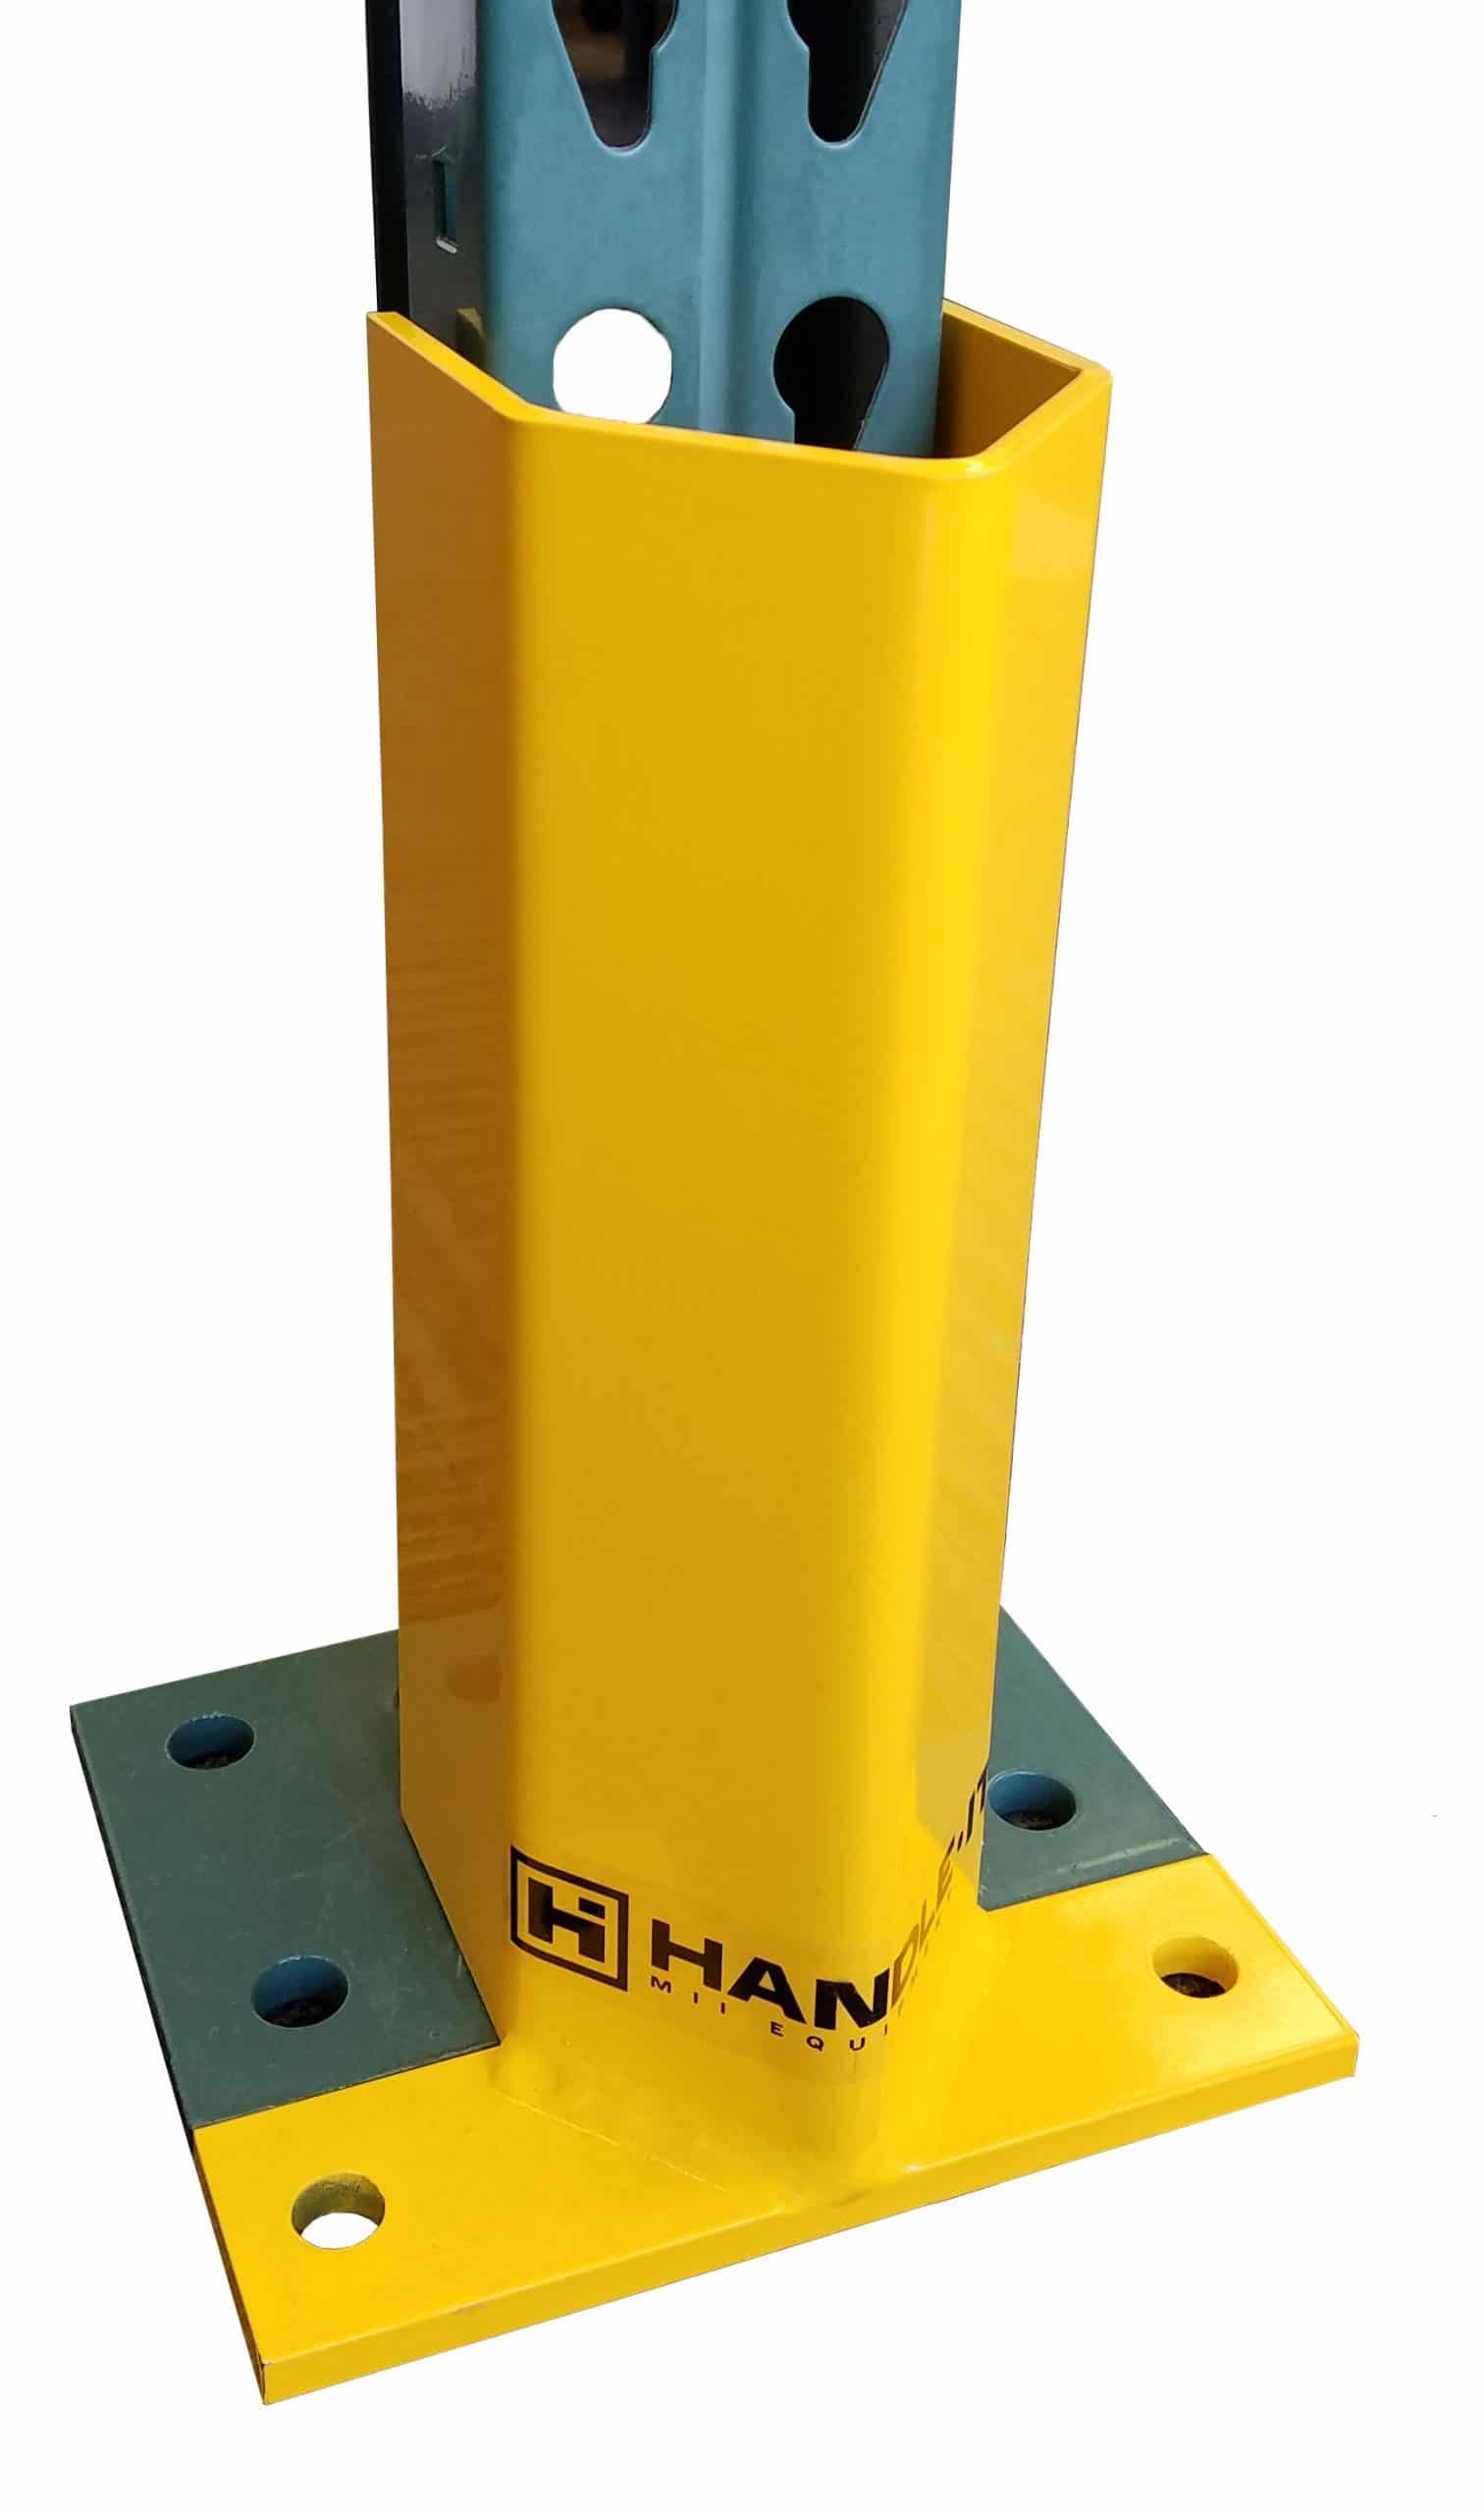 Rack Protection Products: 7 ways to guard against forklift impact